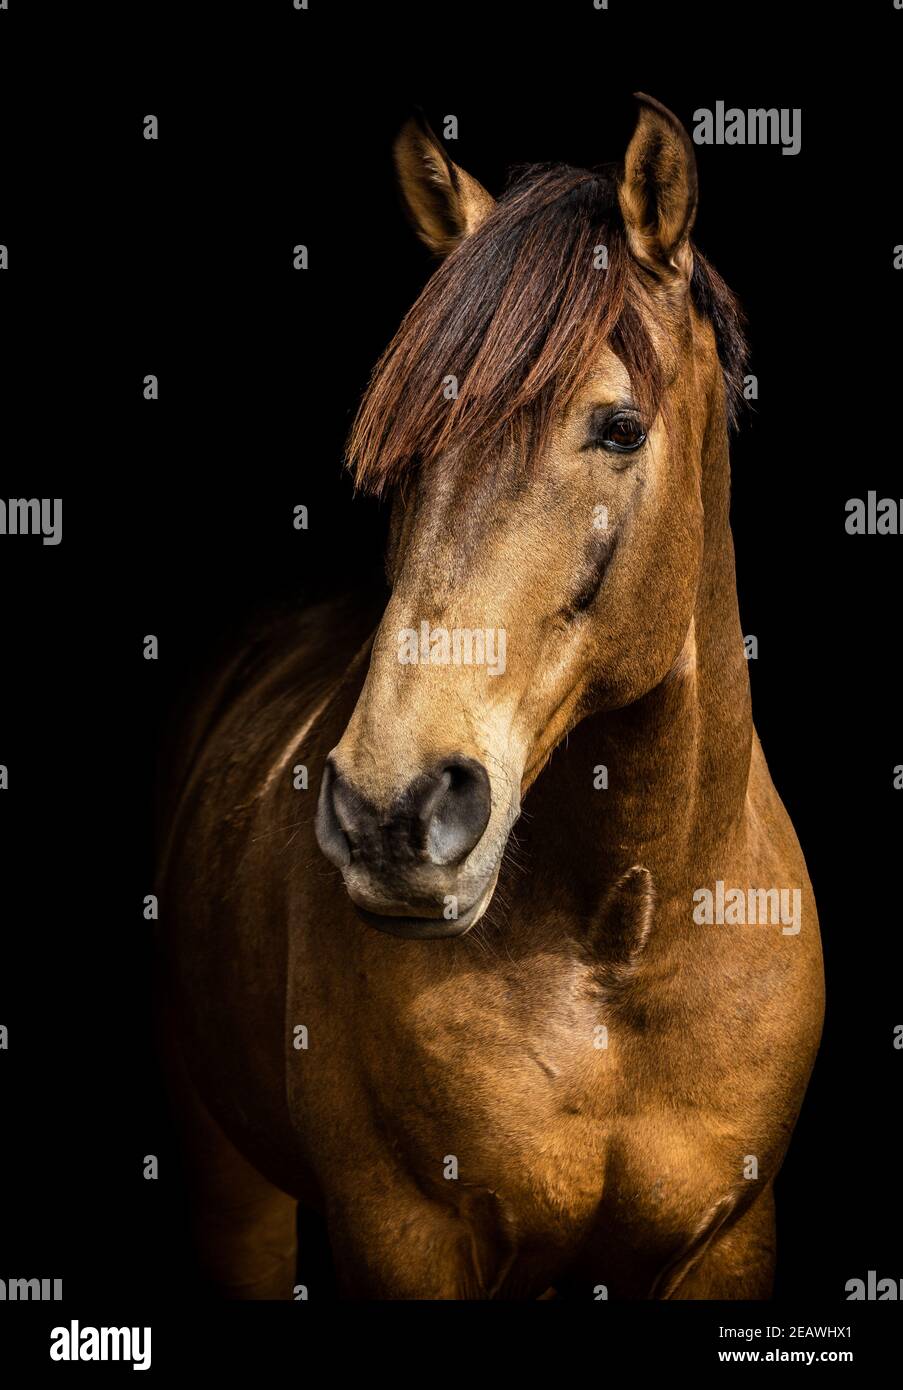 Portrait of Lusitano horse, golden color, isolated, black background, looking to the side. Stock Photo